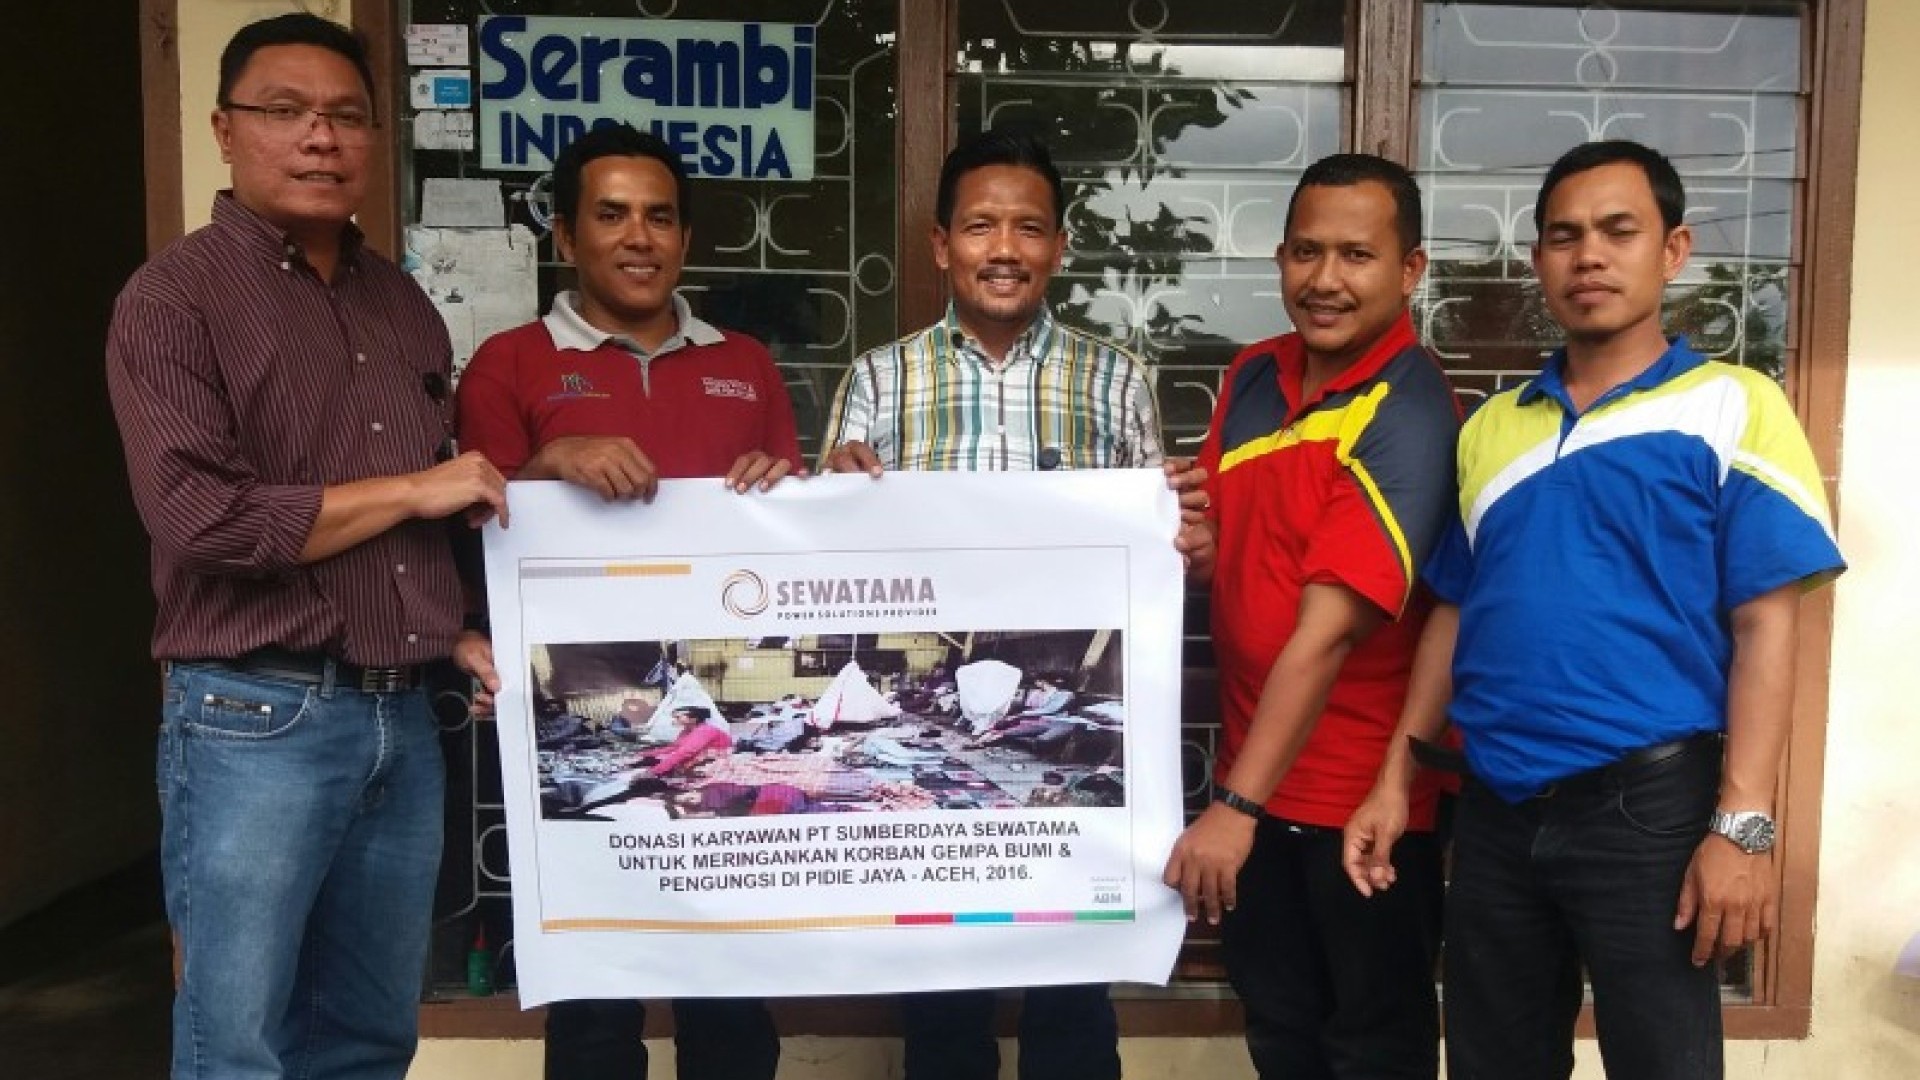 Sewatama And DKM AN-NUR PT Tia participates to donate Aceh Earthquake in Pidie